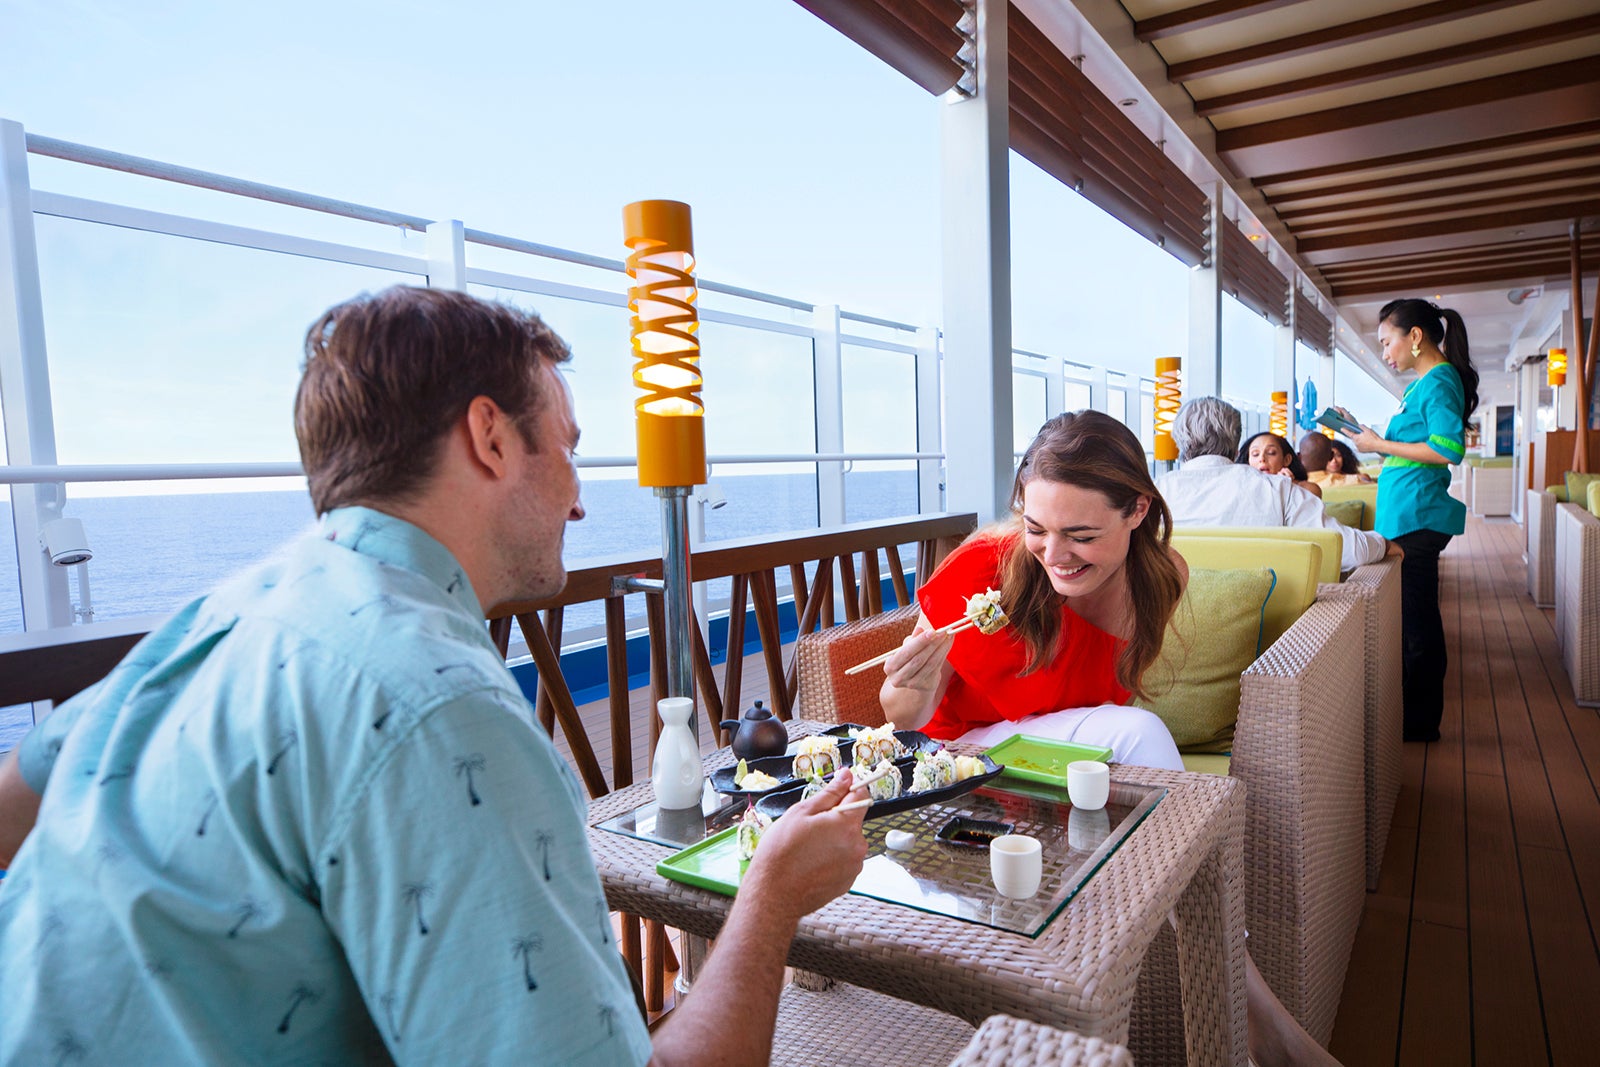 Carnival cruise food: The ultimate guide to restaurants and dining on board